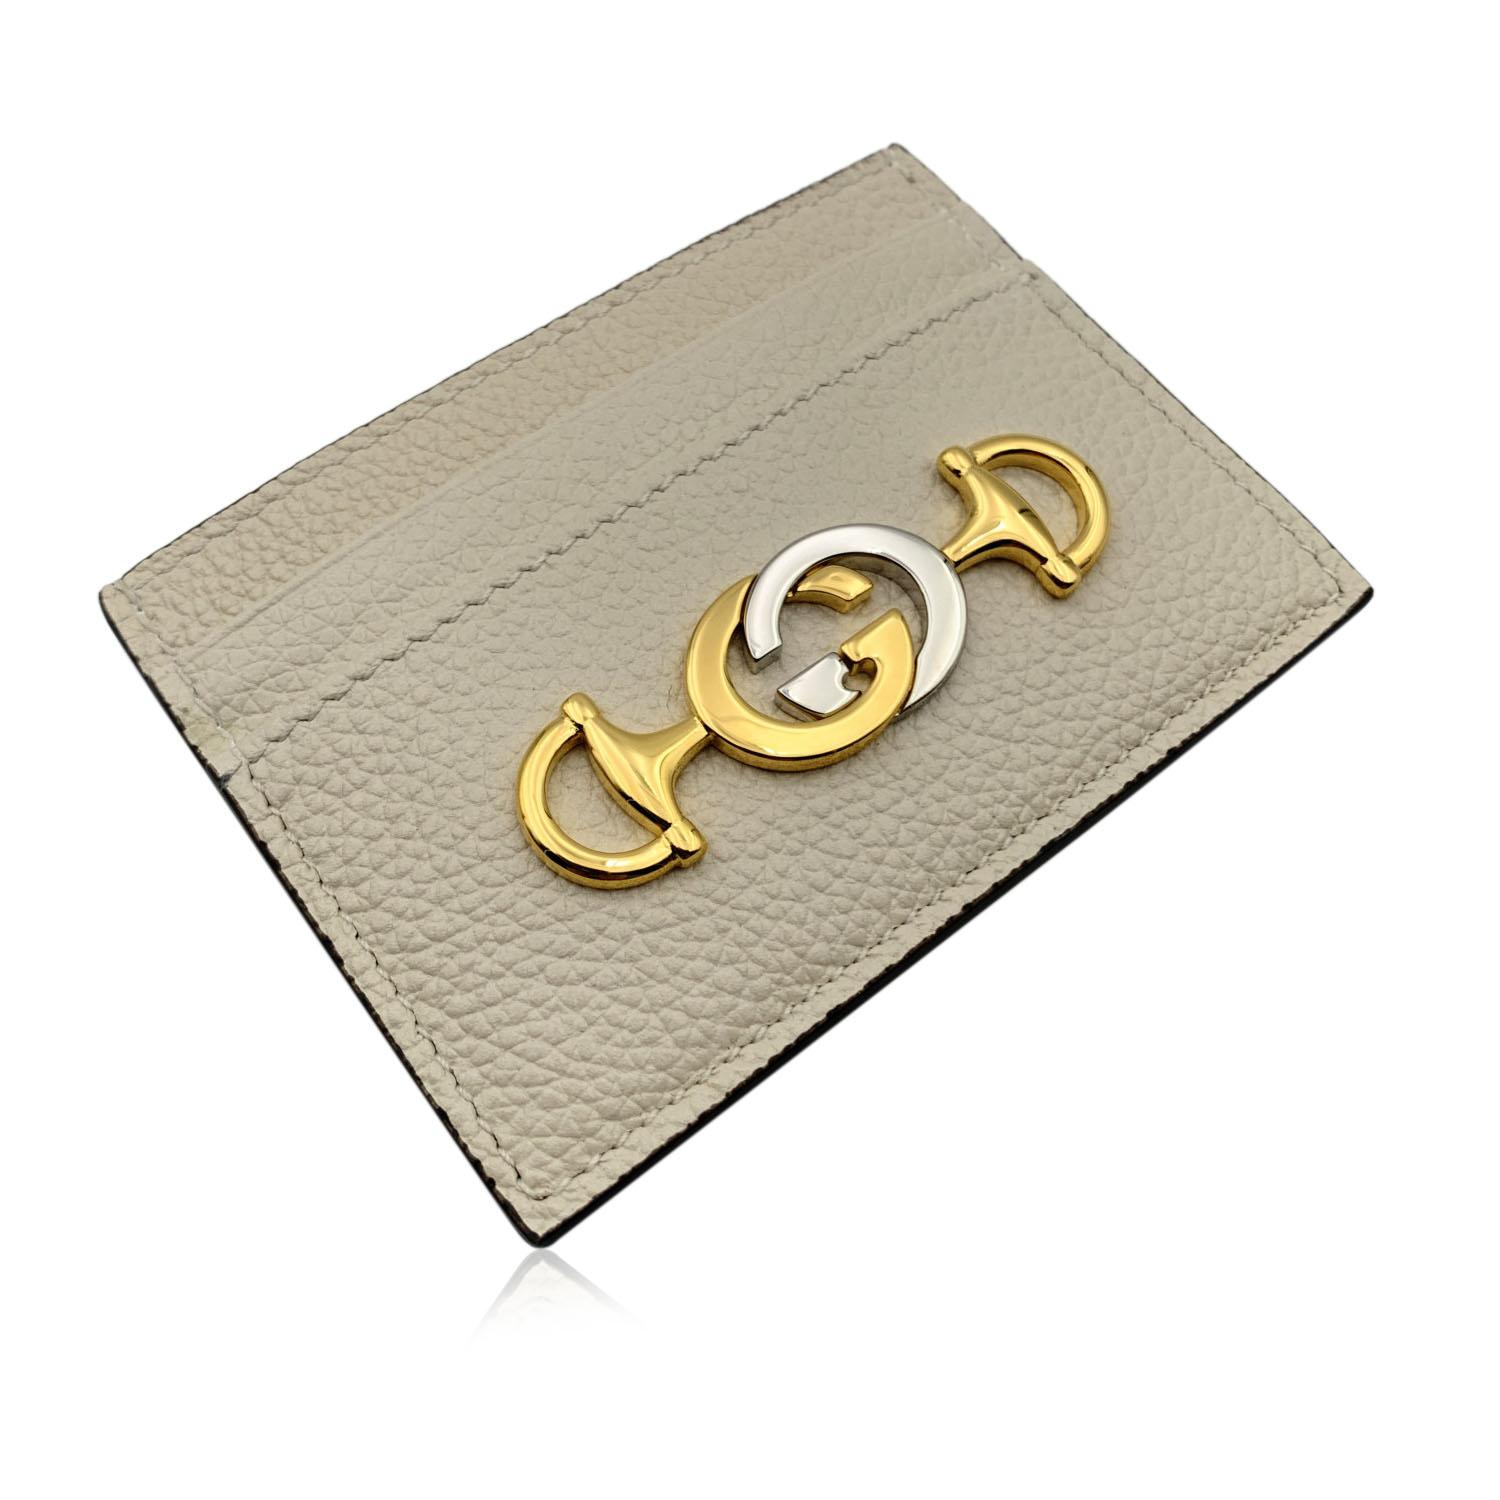 Beautiful Gucci 'Zumi' credit card holder wallet, crafted in white leather with gold and silver metal GG logo and horsebit detailing on the front. Leather and fabric interior. 1 middle open section and 4 credit card slots. 'Gucci - Made in Italy'